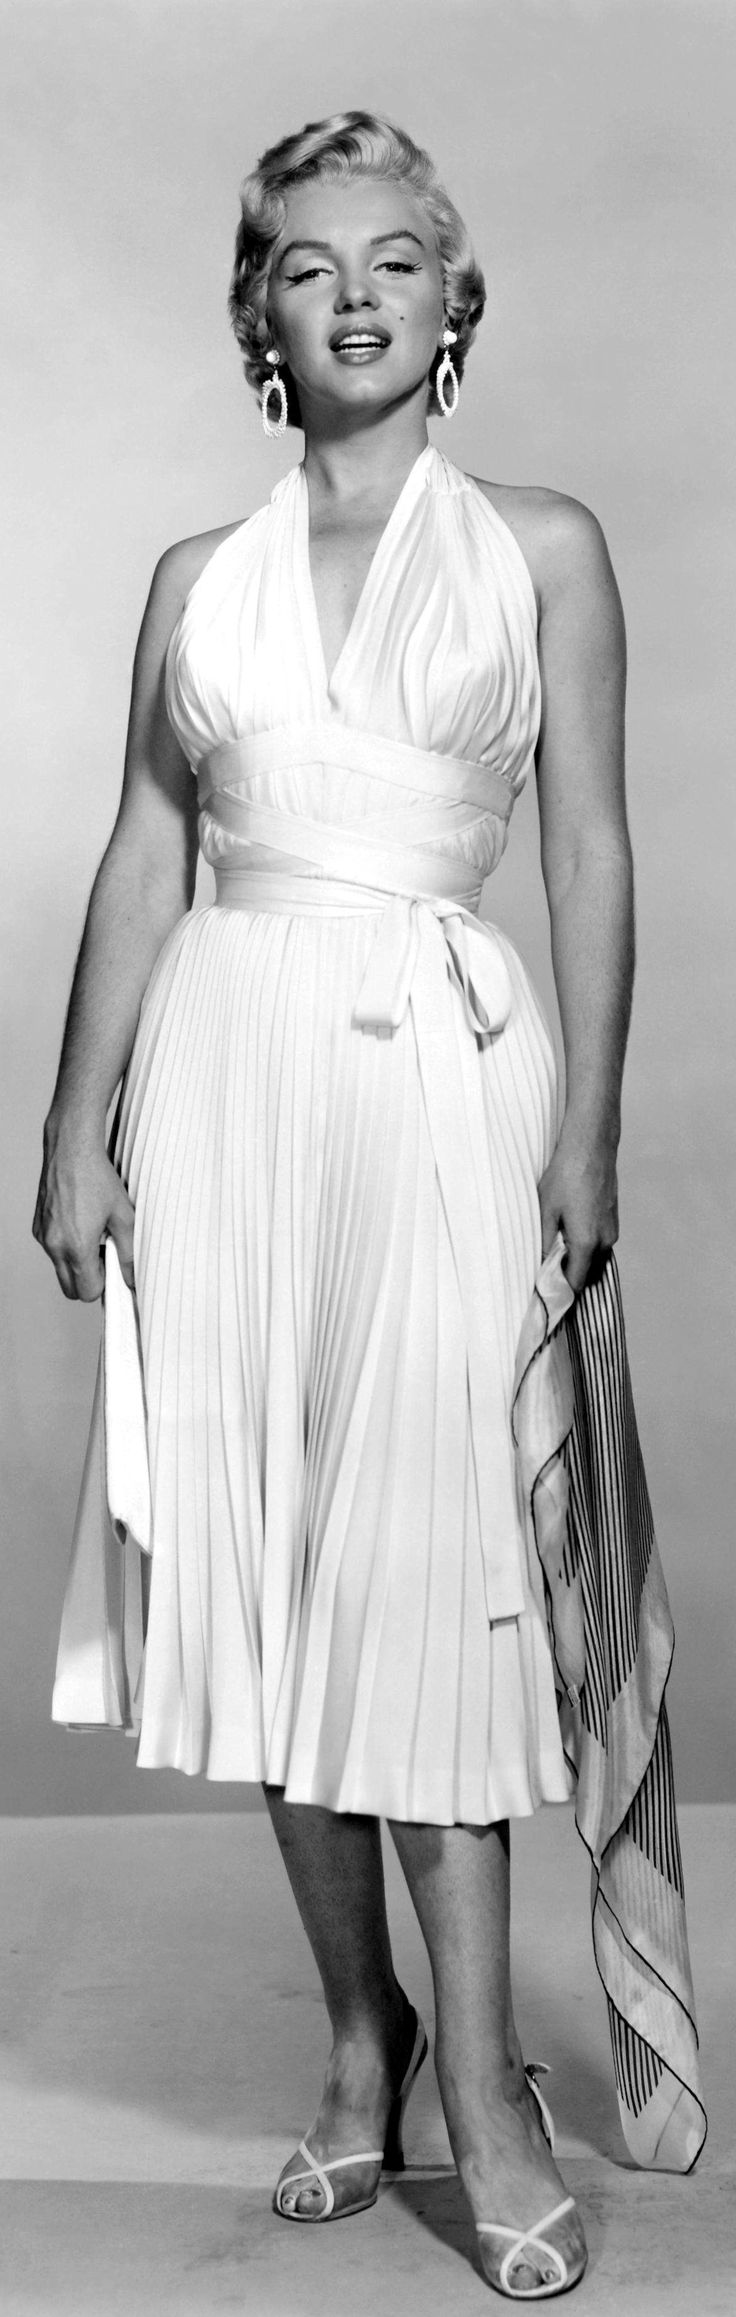 Marilyn Monroe, in William Travilla, The Seven Year Itch, Iconic dress, 1955